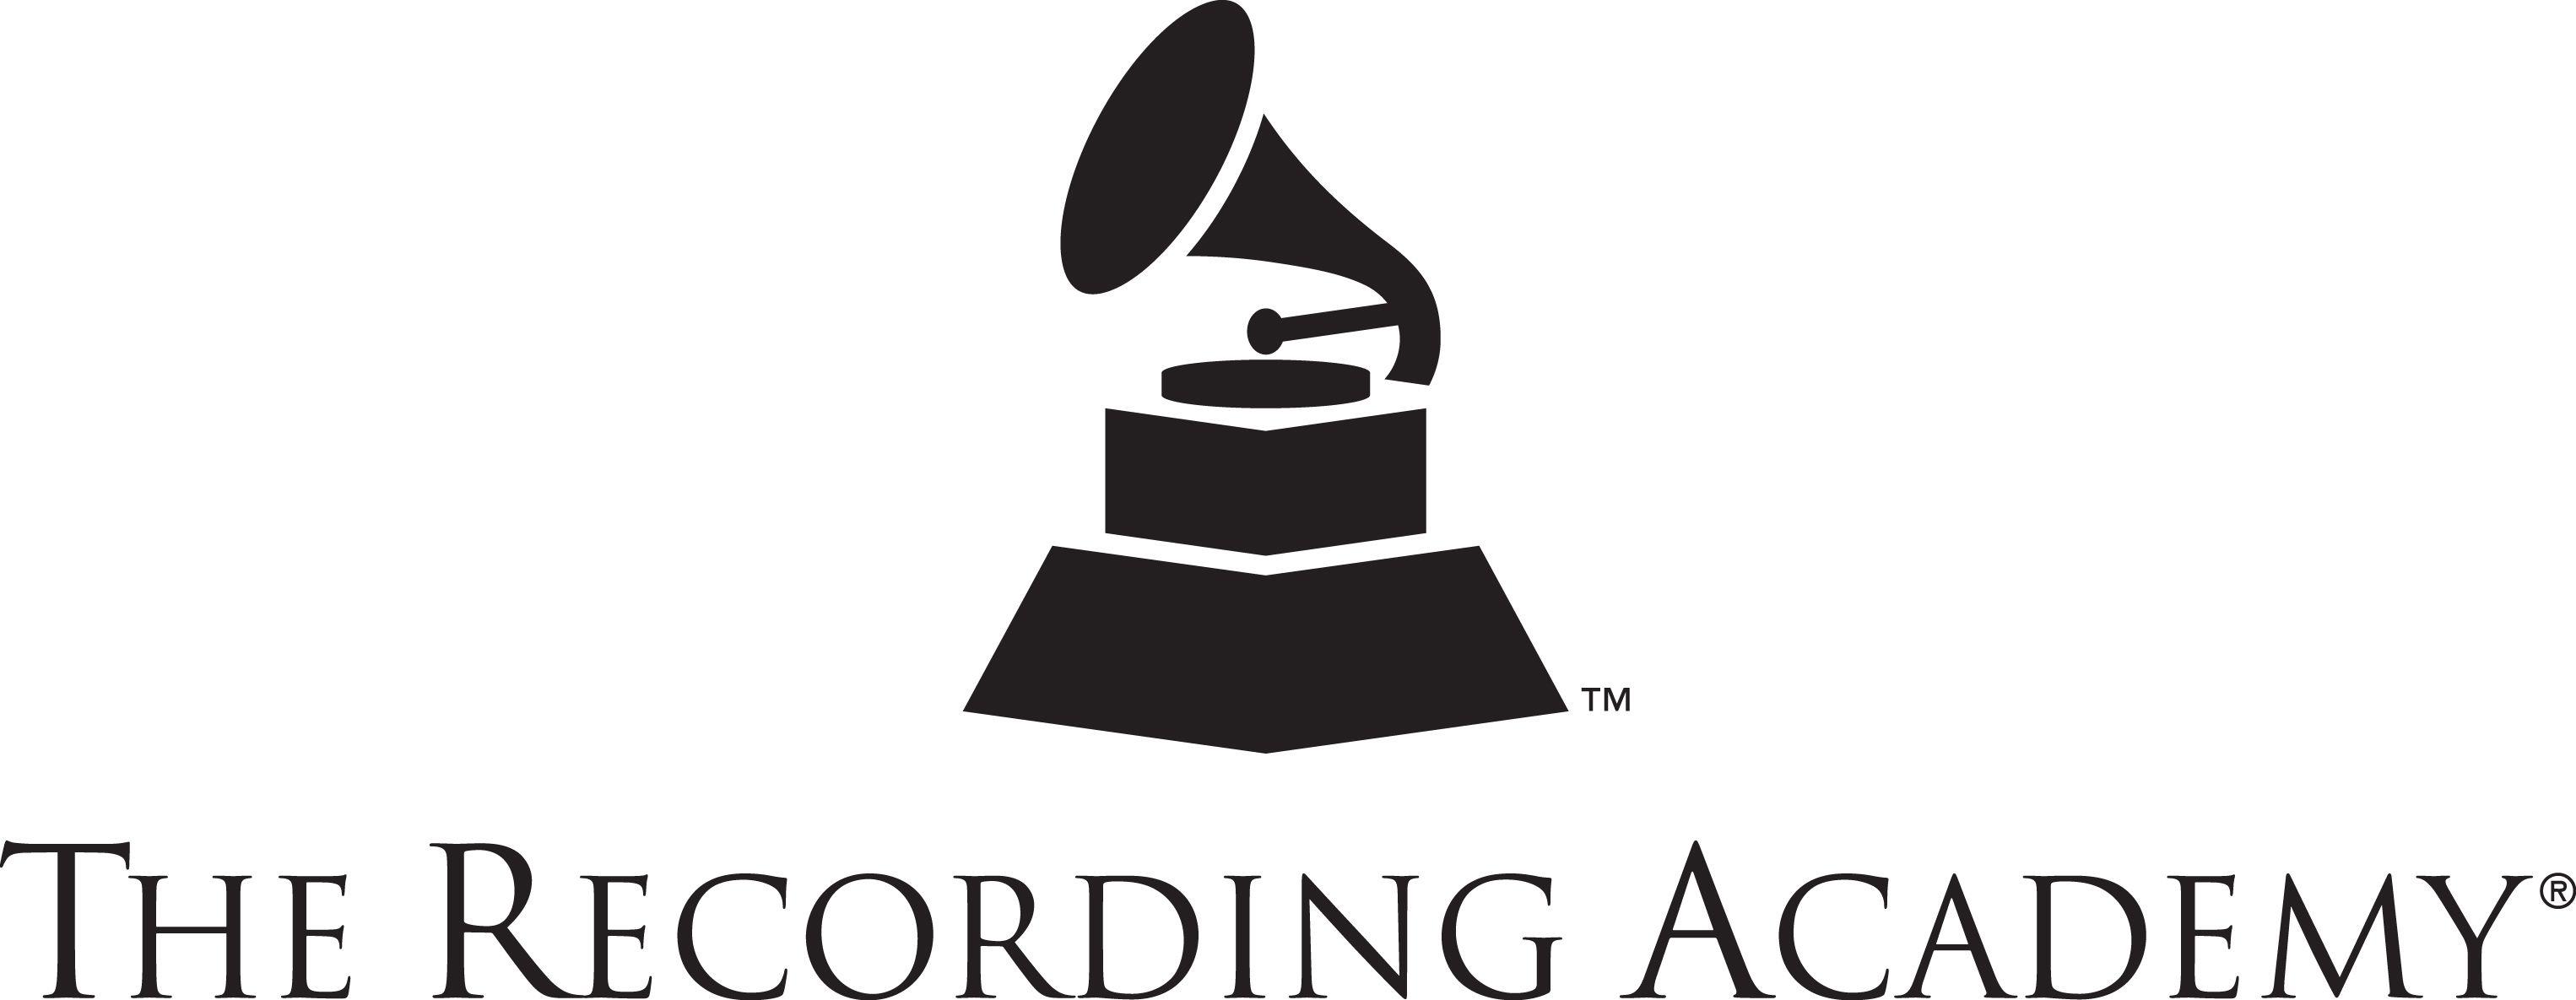 Grammy Logo - GRAMMY Happy Hour hosted by The Recording Academy | SXSW 2015 Event ...